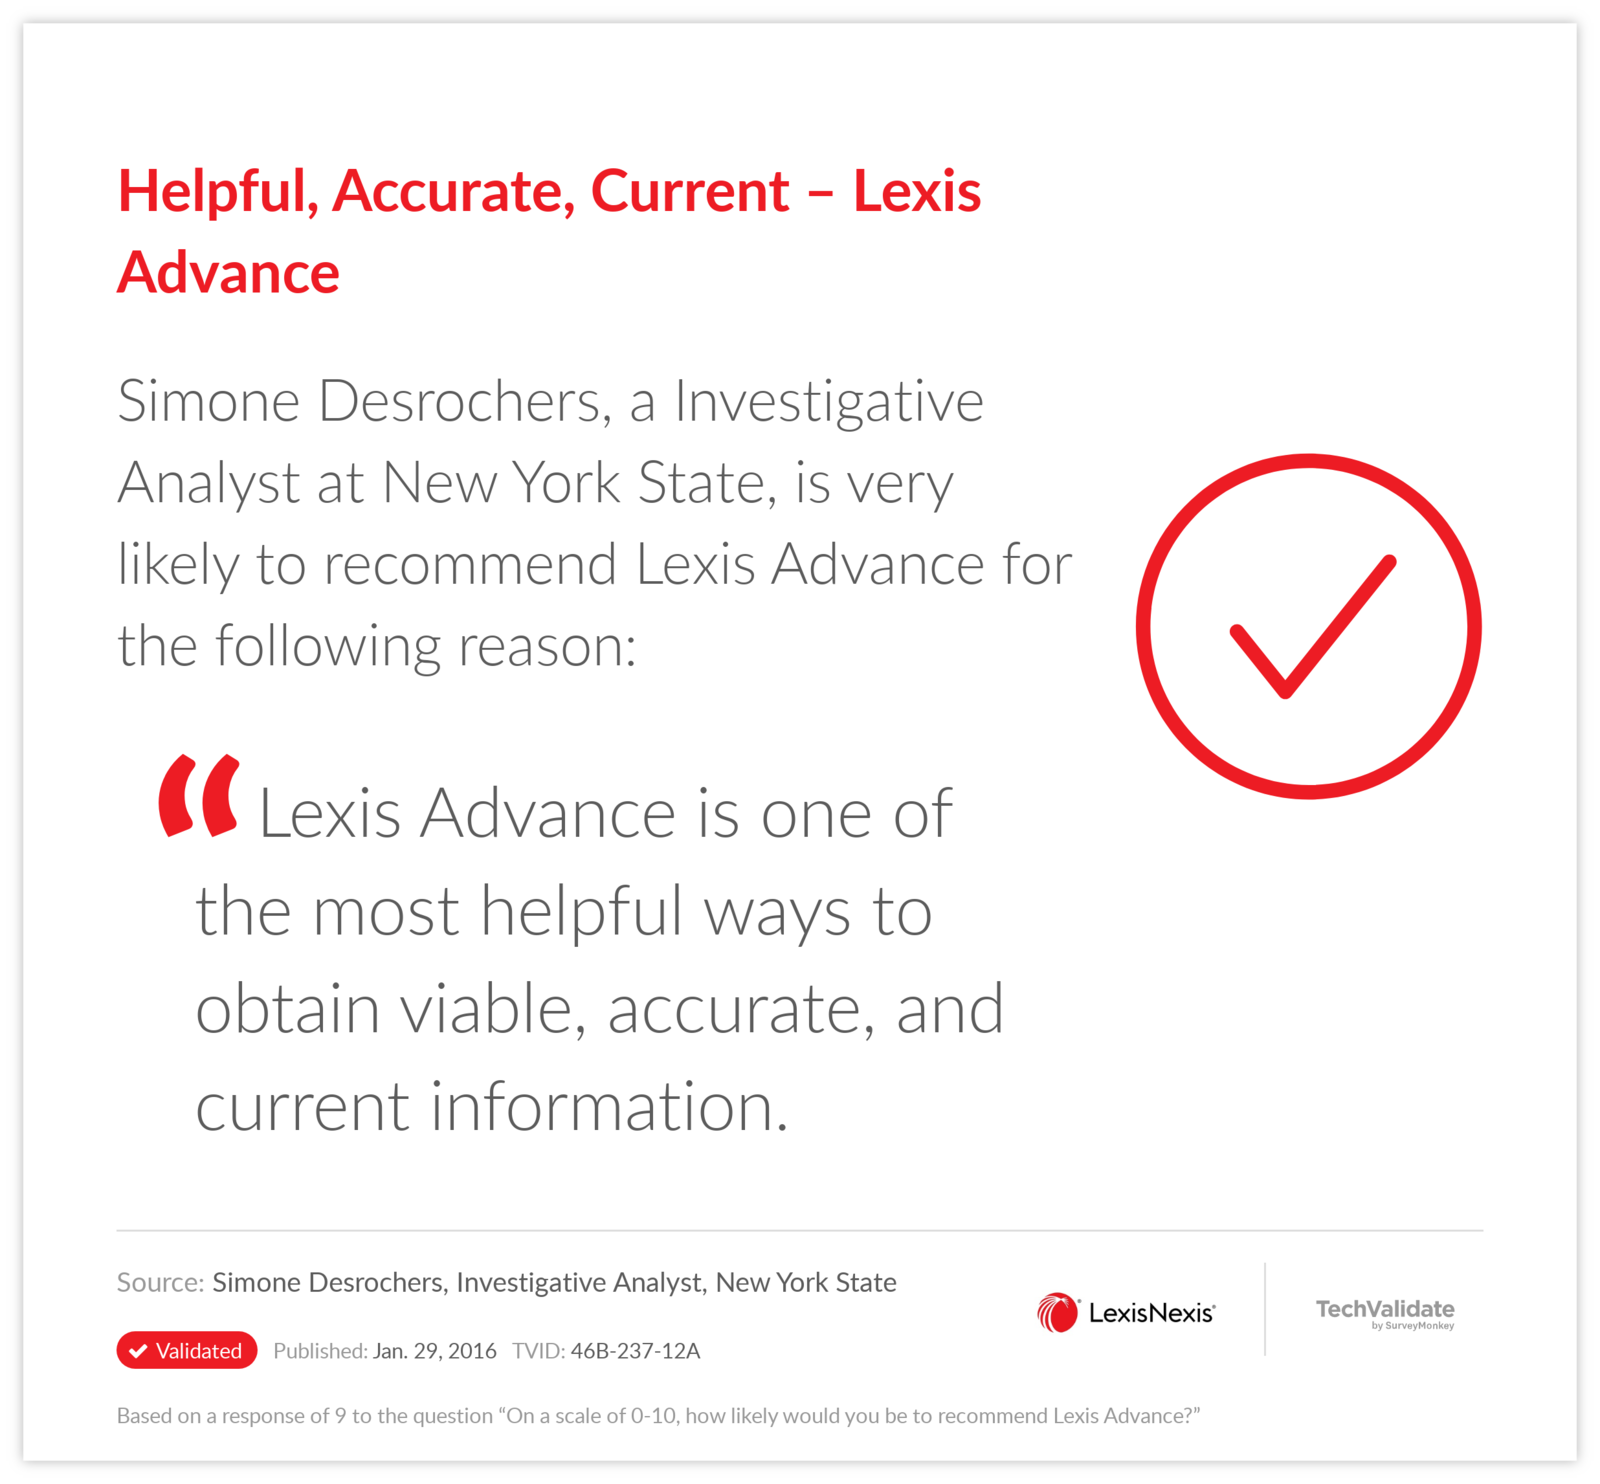 Helpful, Accurate, Current-Lexis Advance